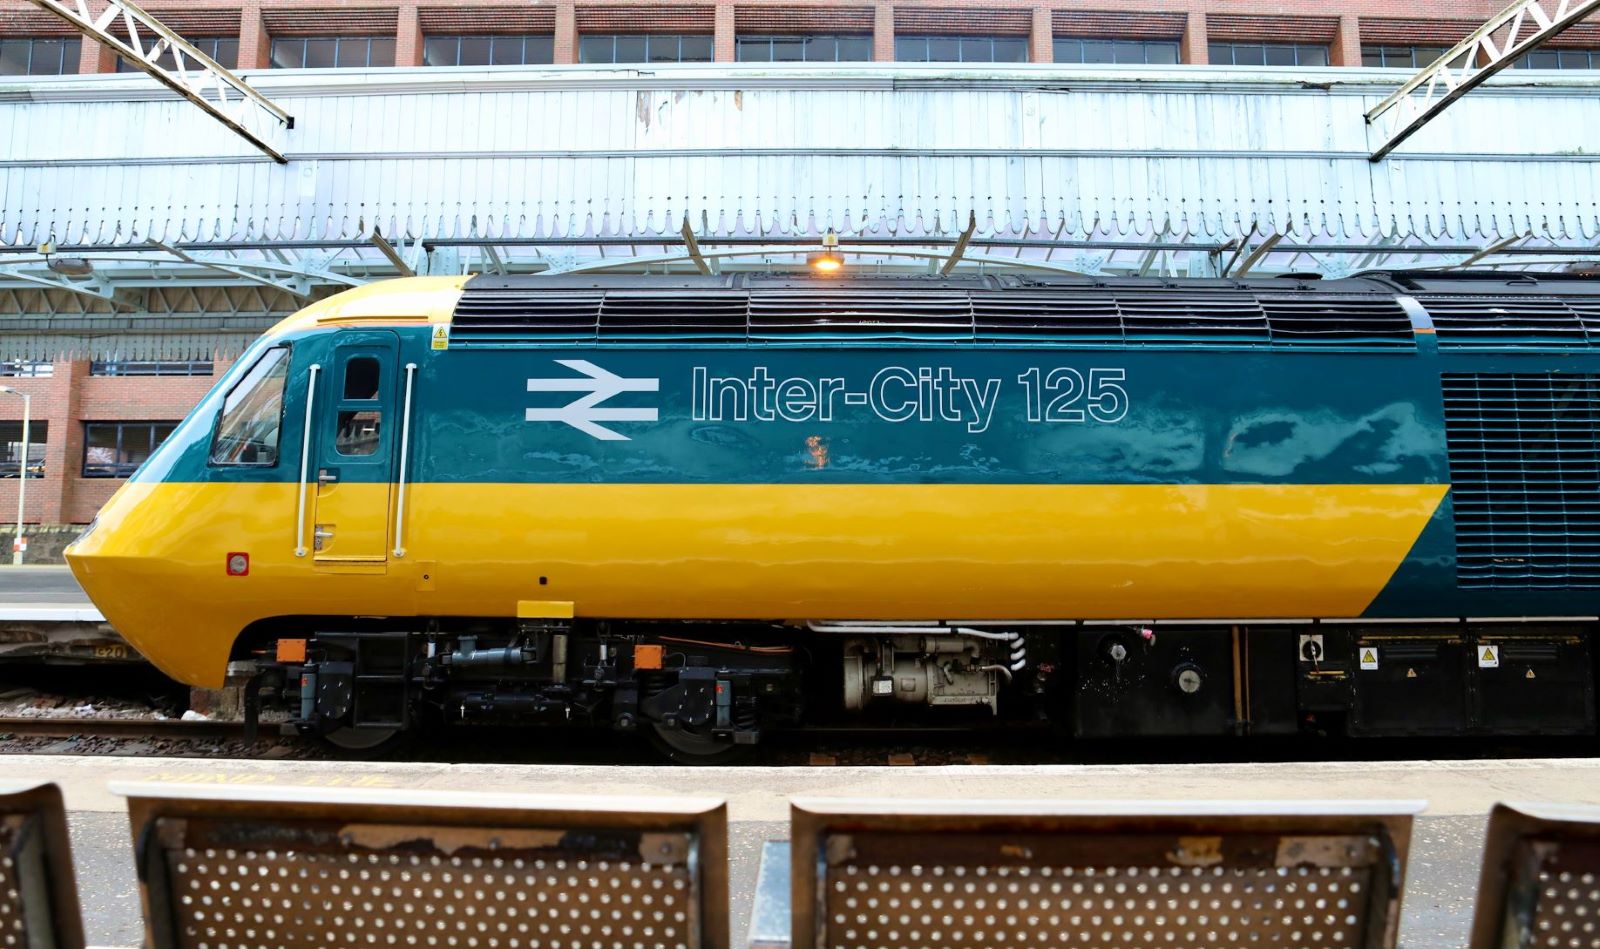 Inter-City 125 HST Farewell Collectors’ Items Released For Sale